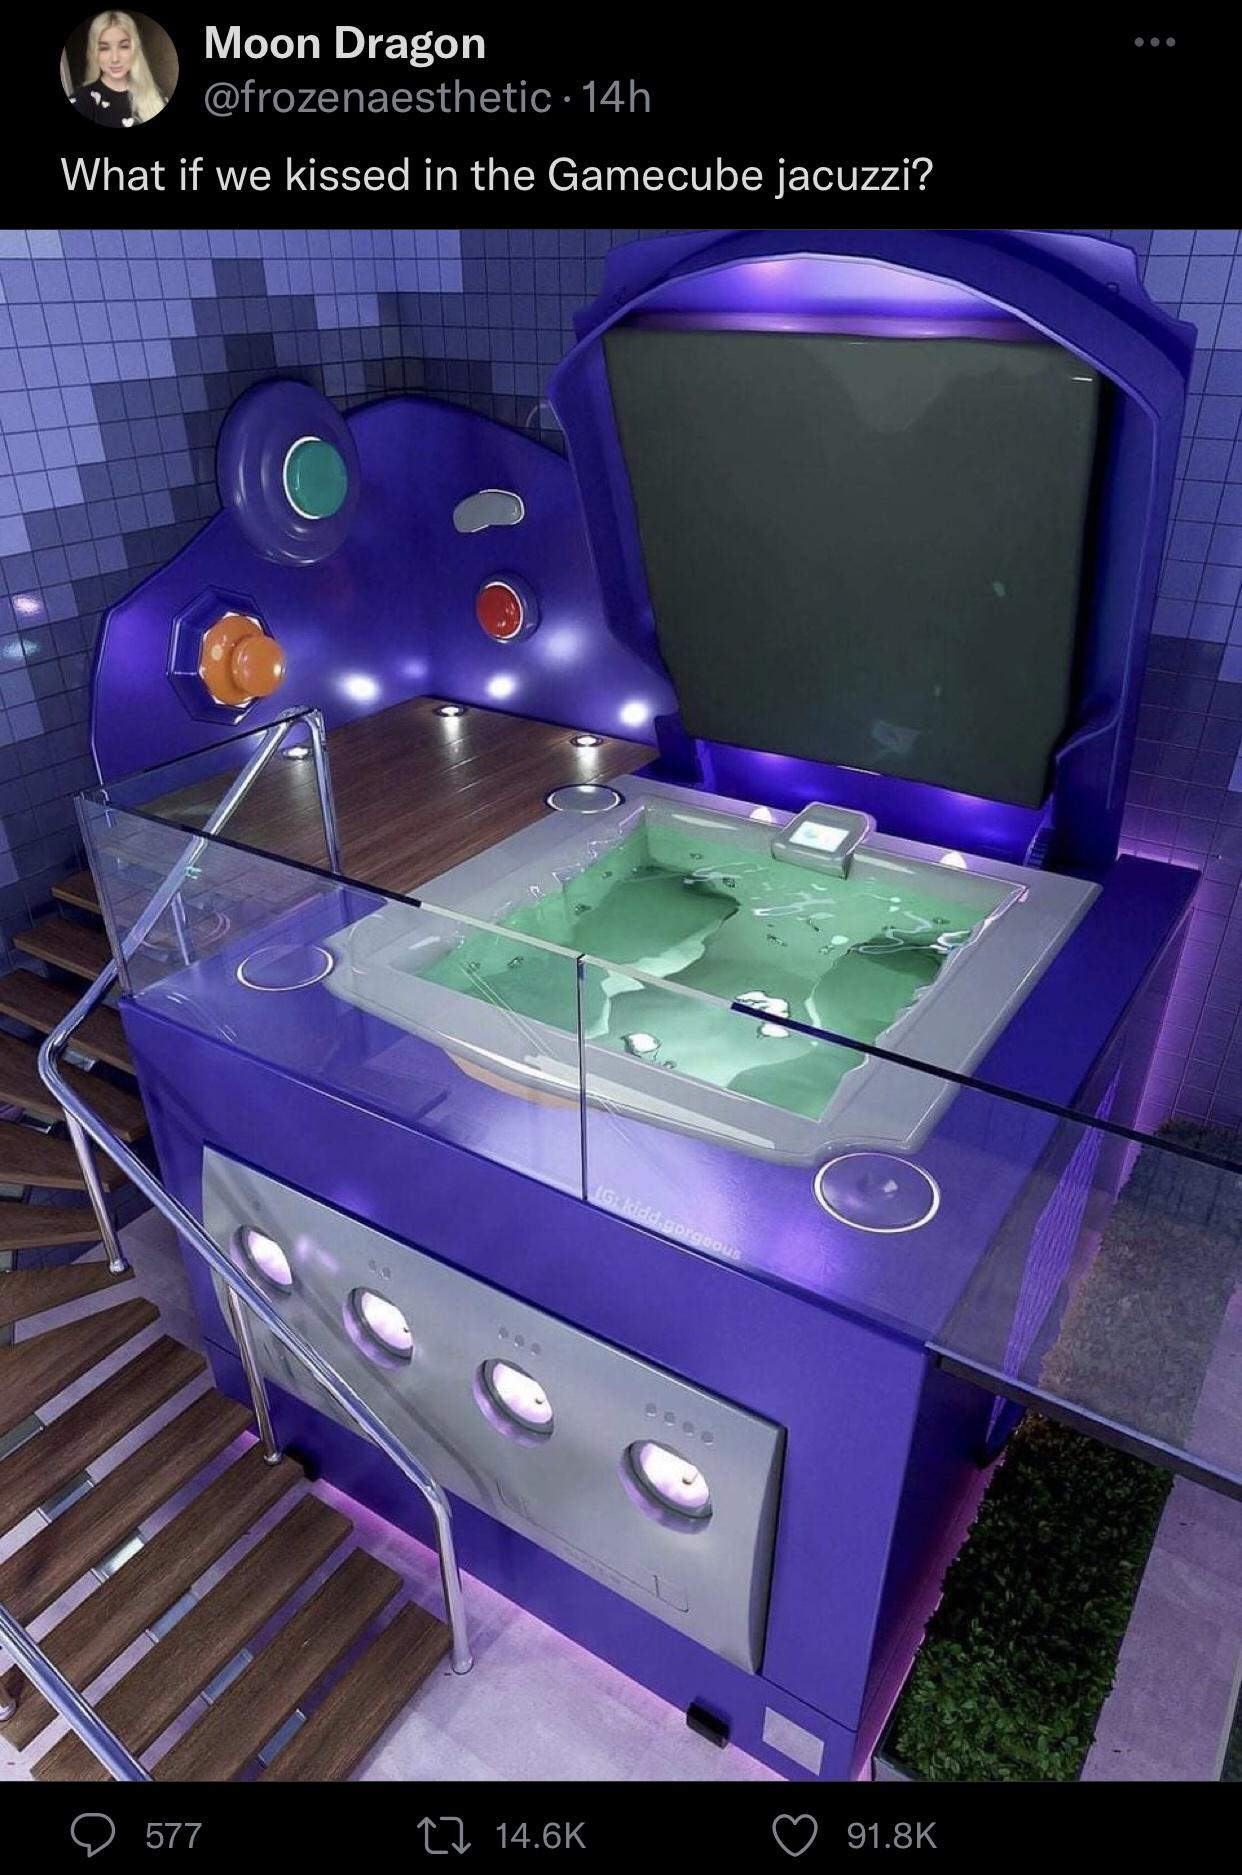 Hot Tweets - What if we kissed in the Gamecube jacuzzi?